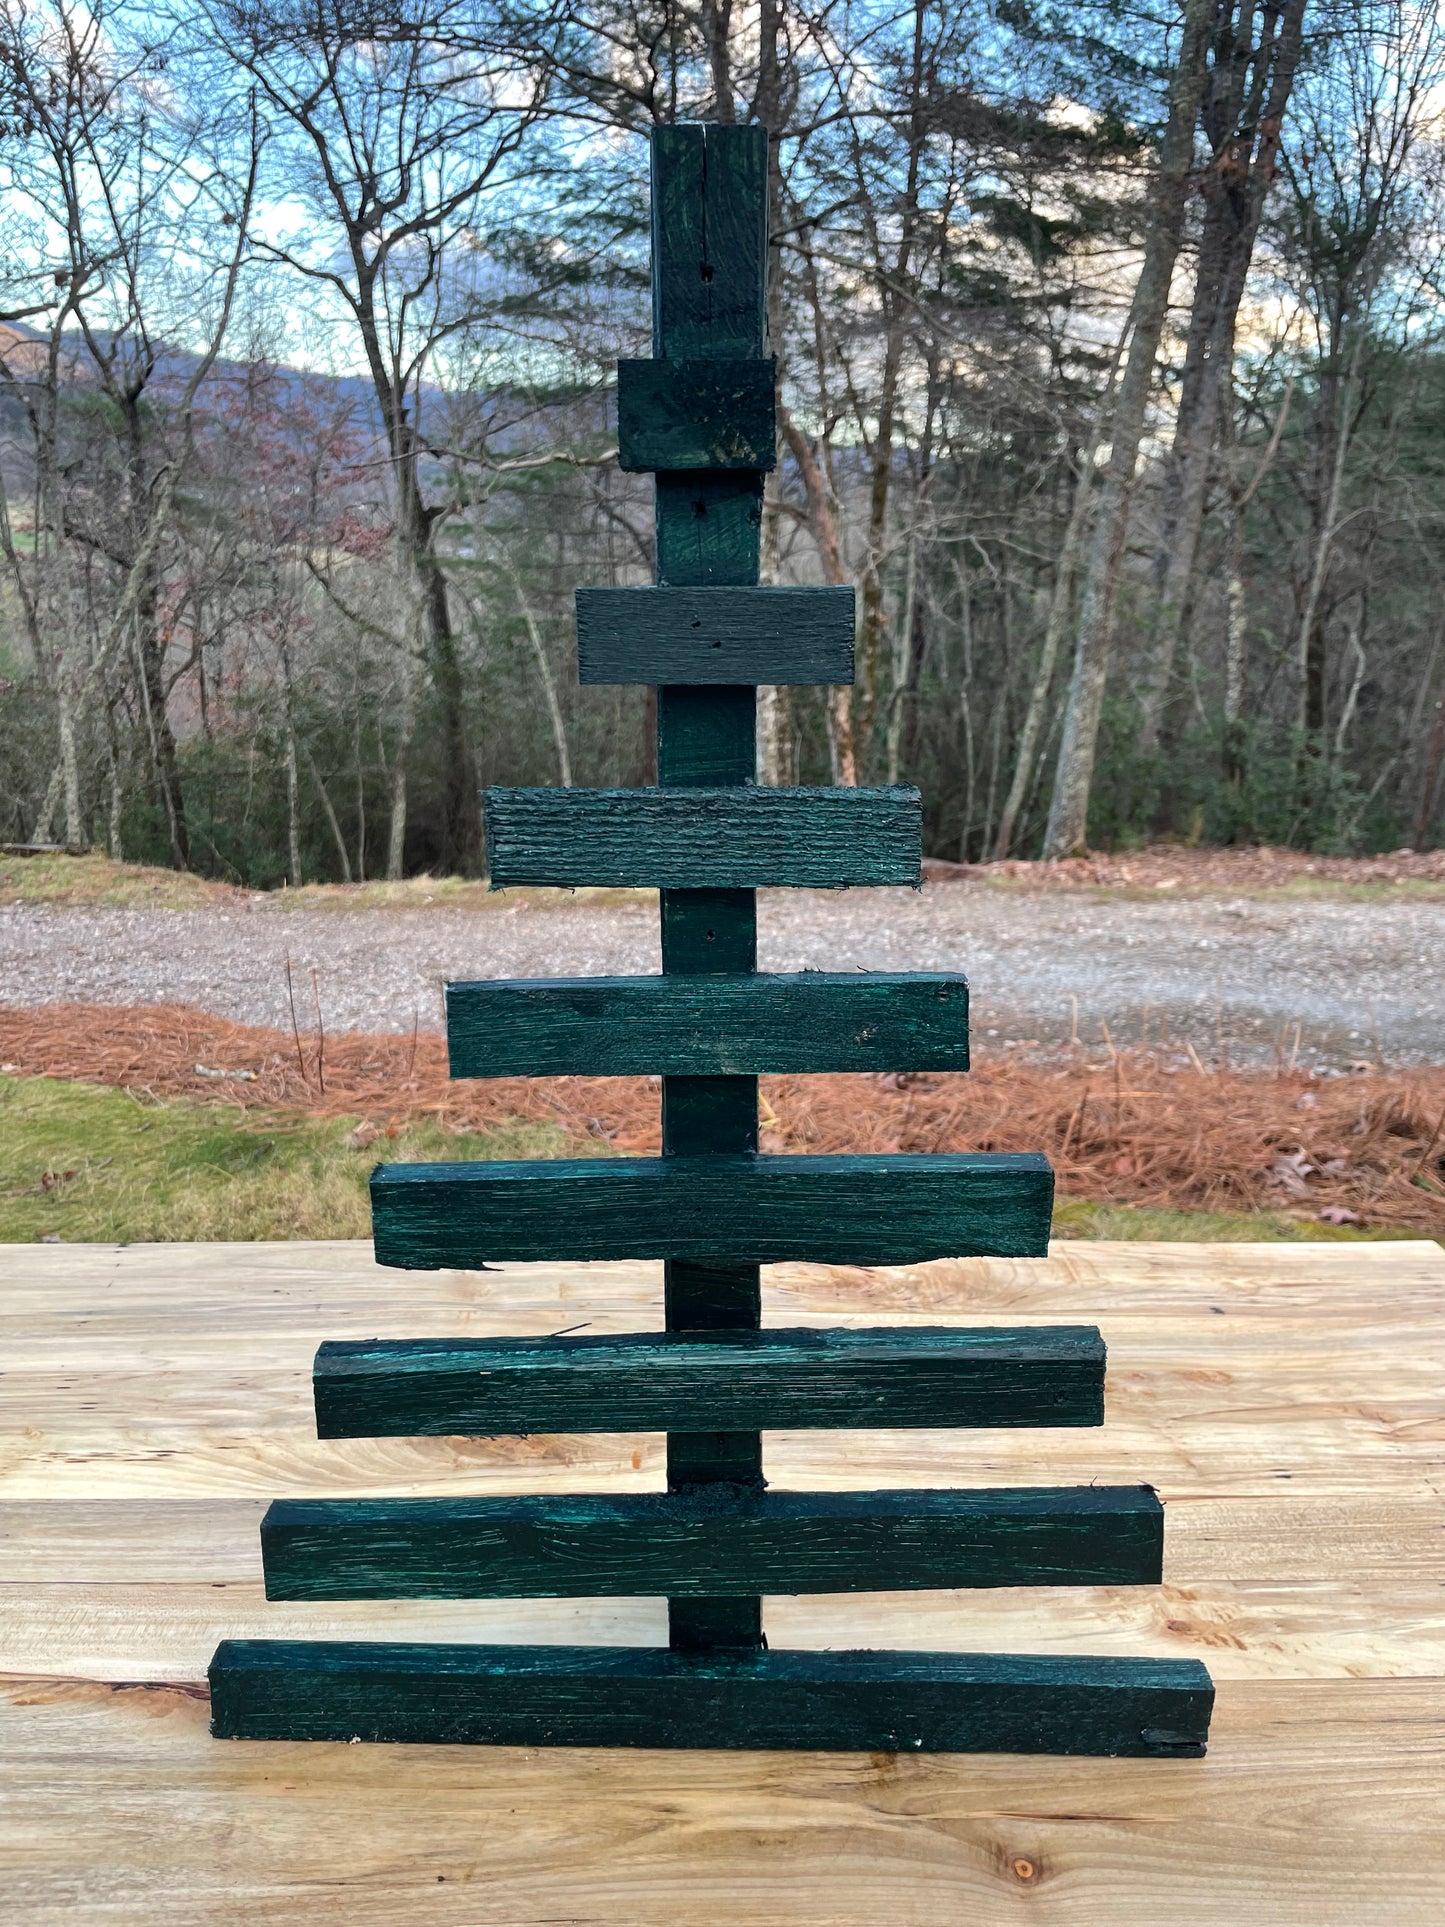 Christmas is just around the corner! Looking for a small Christmas tree that is easy to maintain or will just bring a little extra decoration to your festive home? Need a last minute gift for a friend? Check out these wooden Christmas trees made from reclaimed pallet wood, and pick a color that would accent your home!